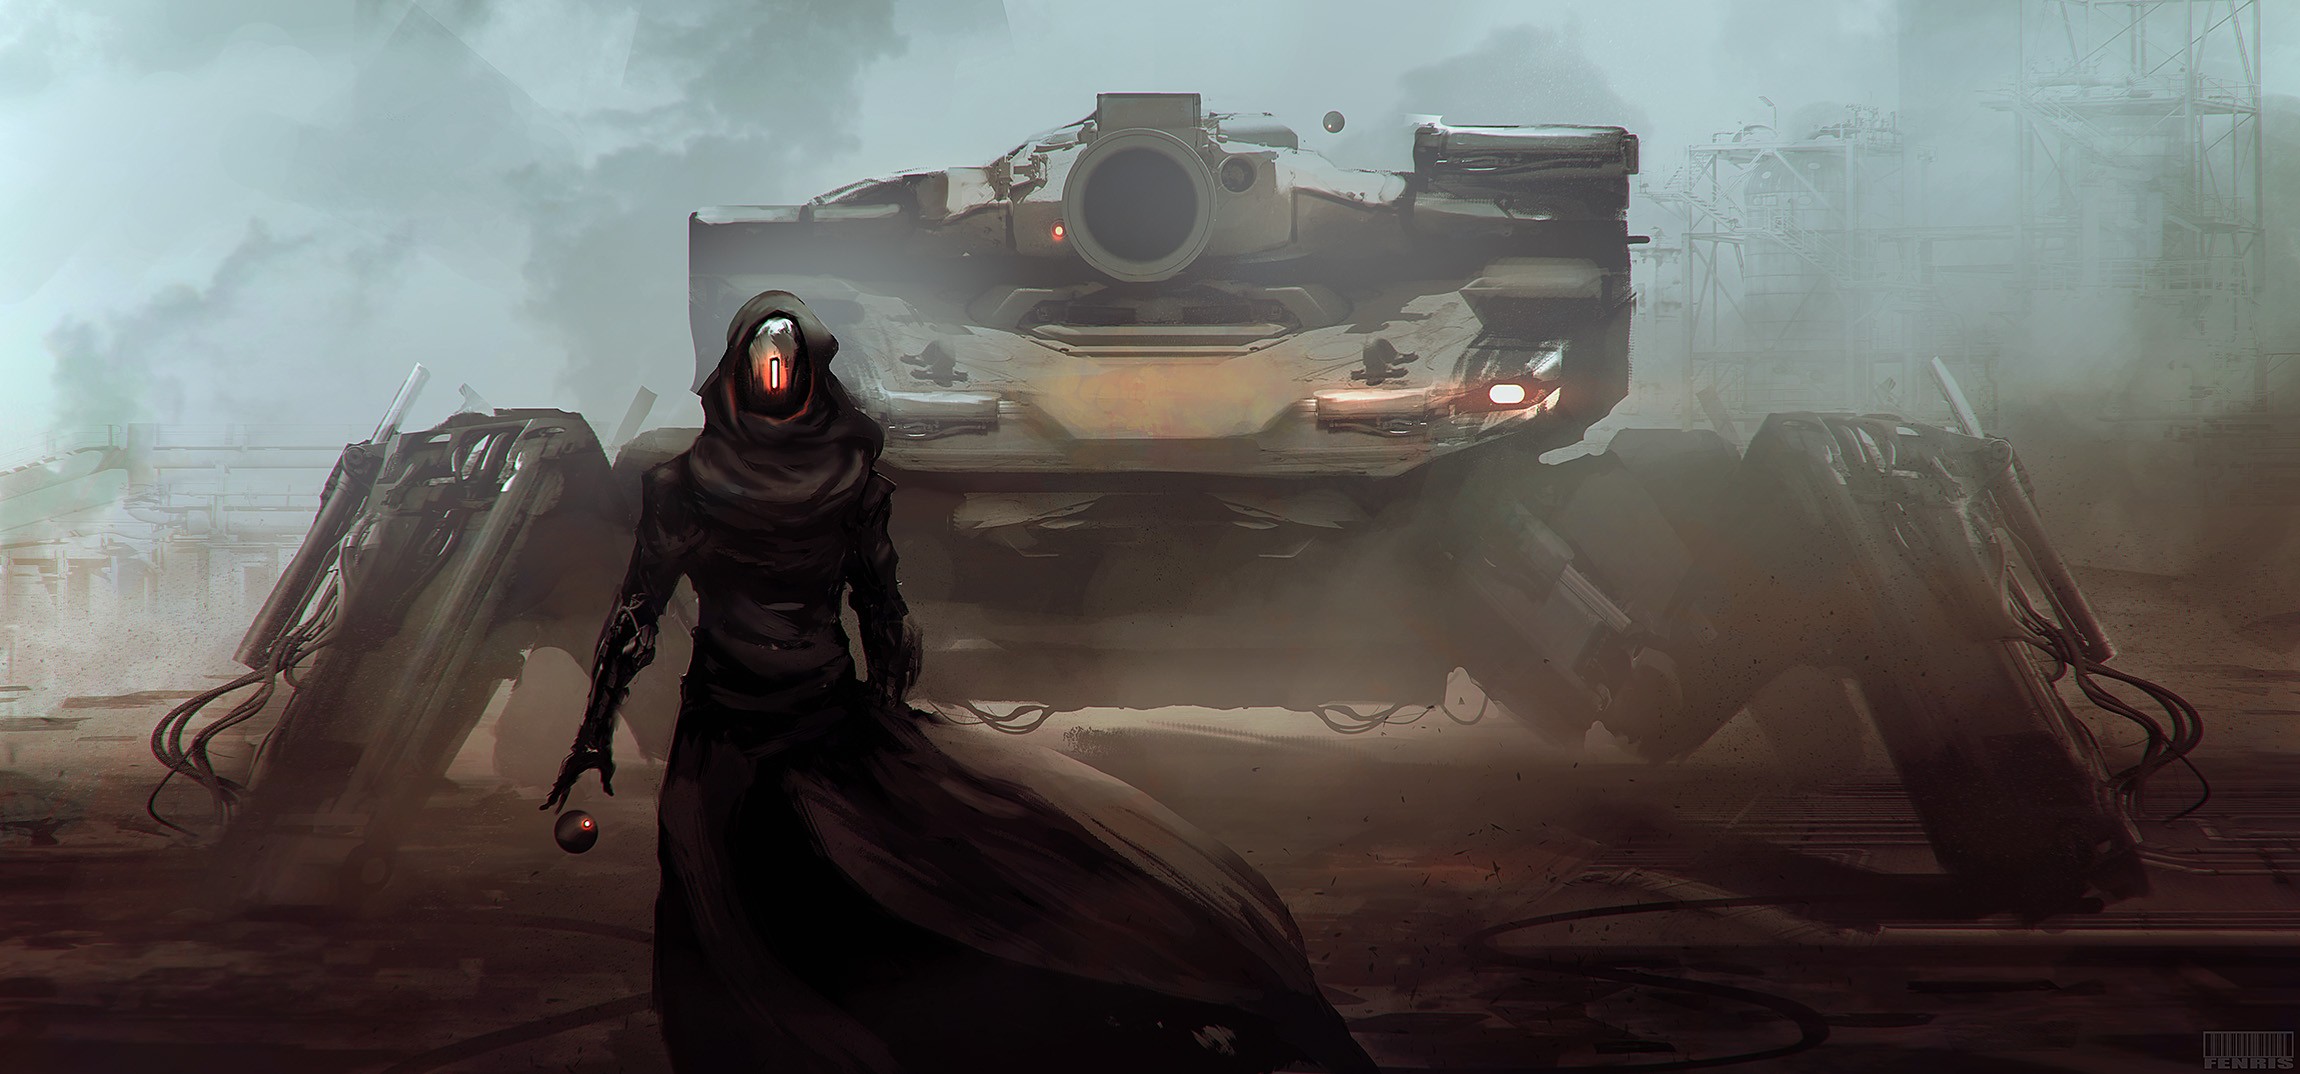 General 2300x1074 science fiction artwork frontal view futuristic vehicle